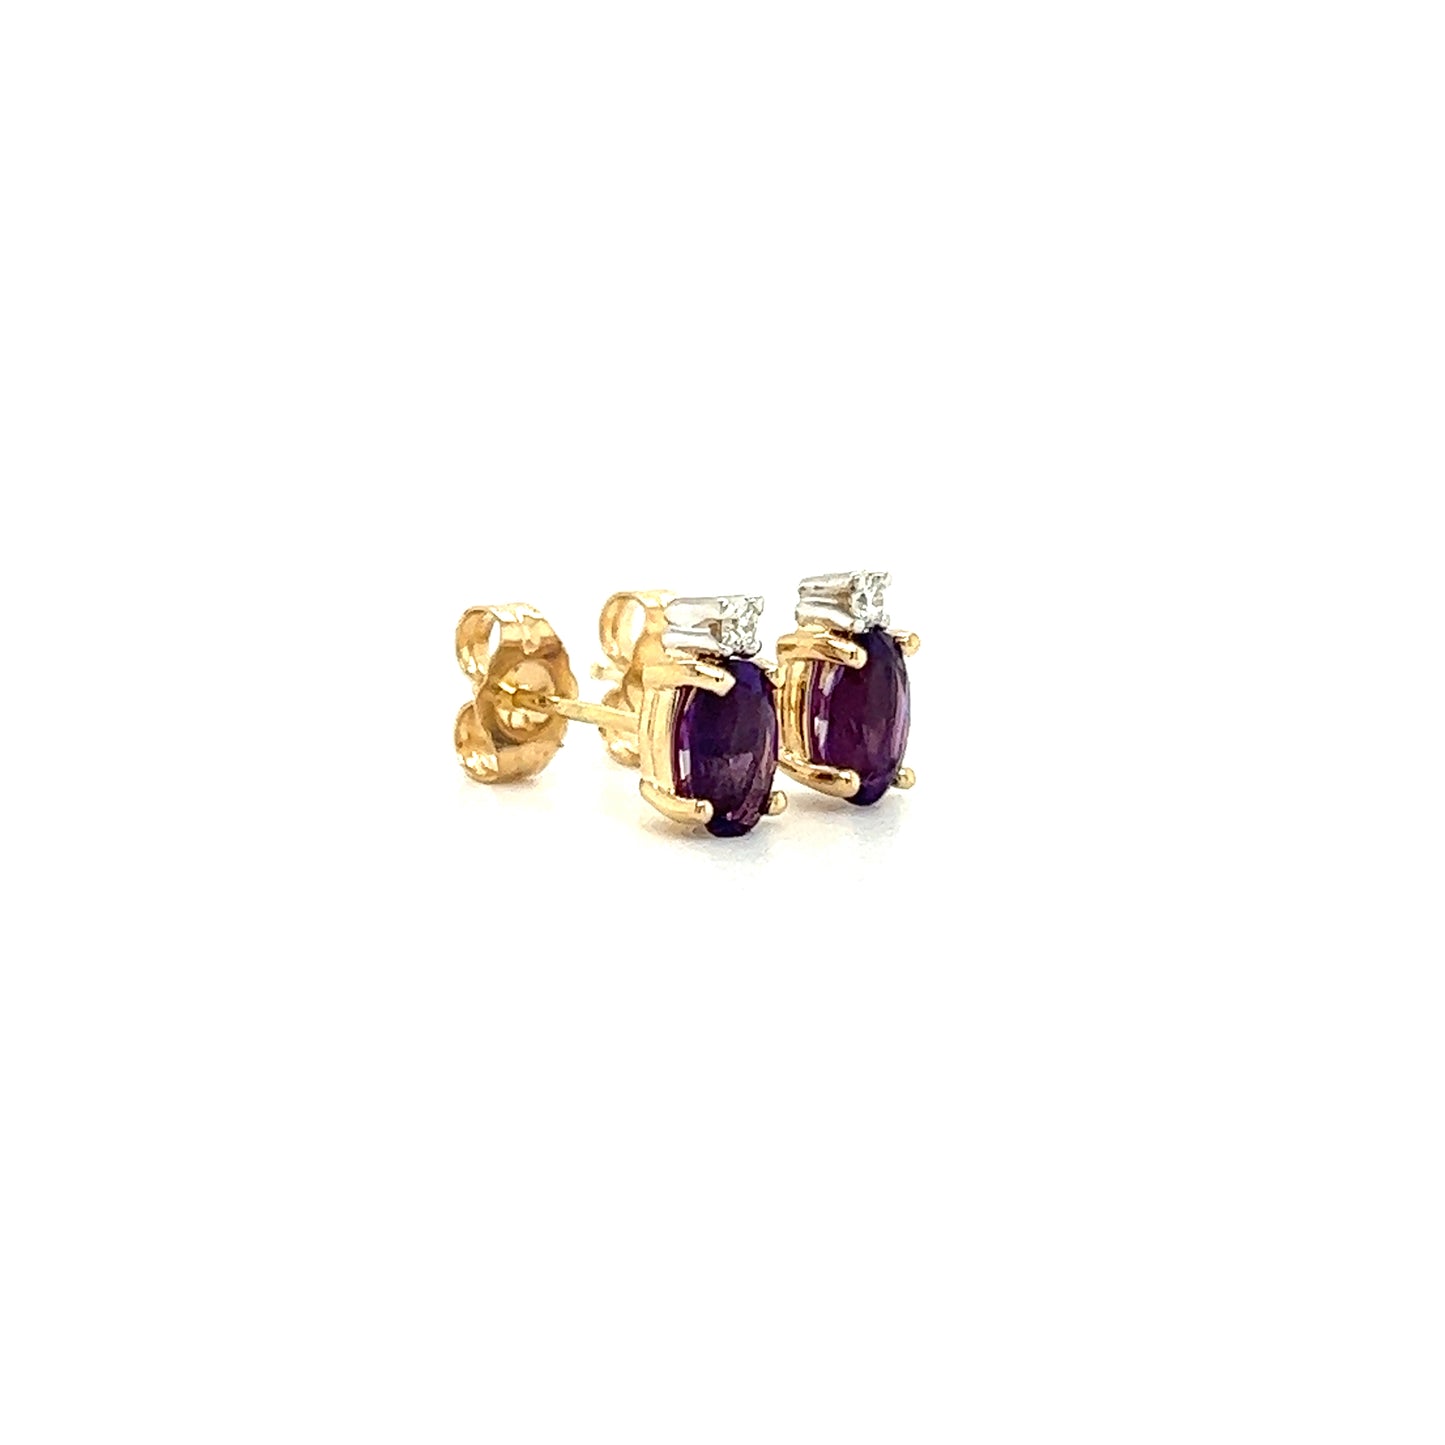 Oval Amethyst Stud Earrings with Accent Diamonds in 14K Yellow Gold Left Side View